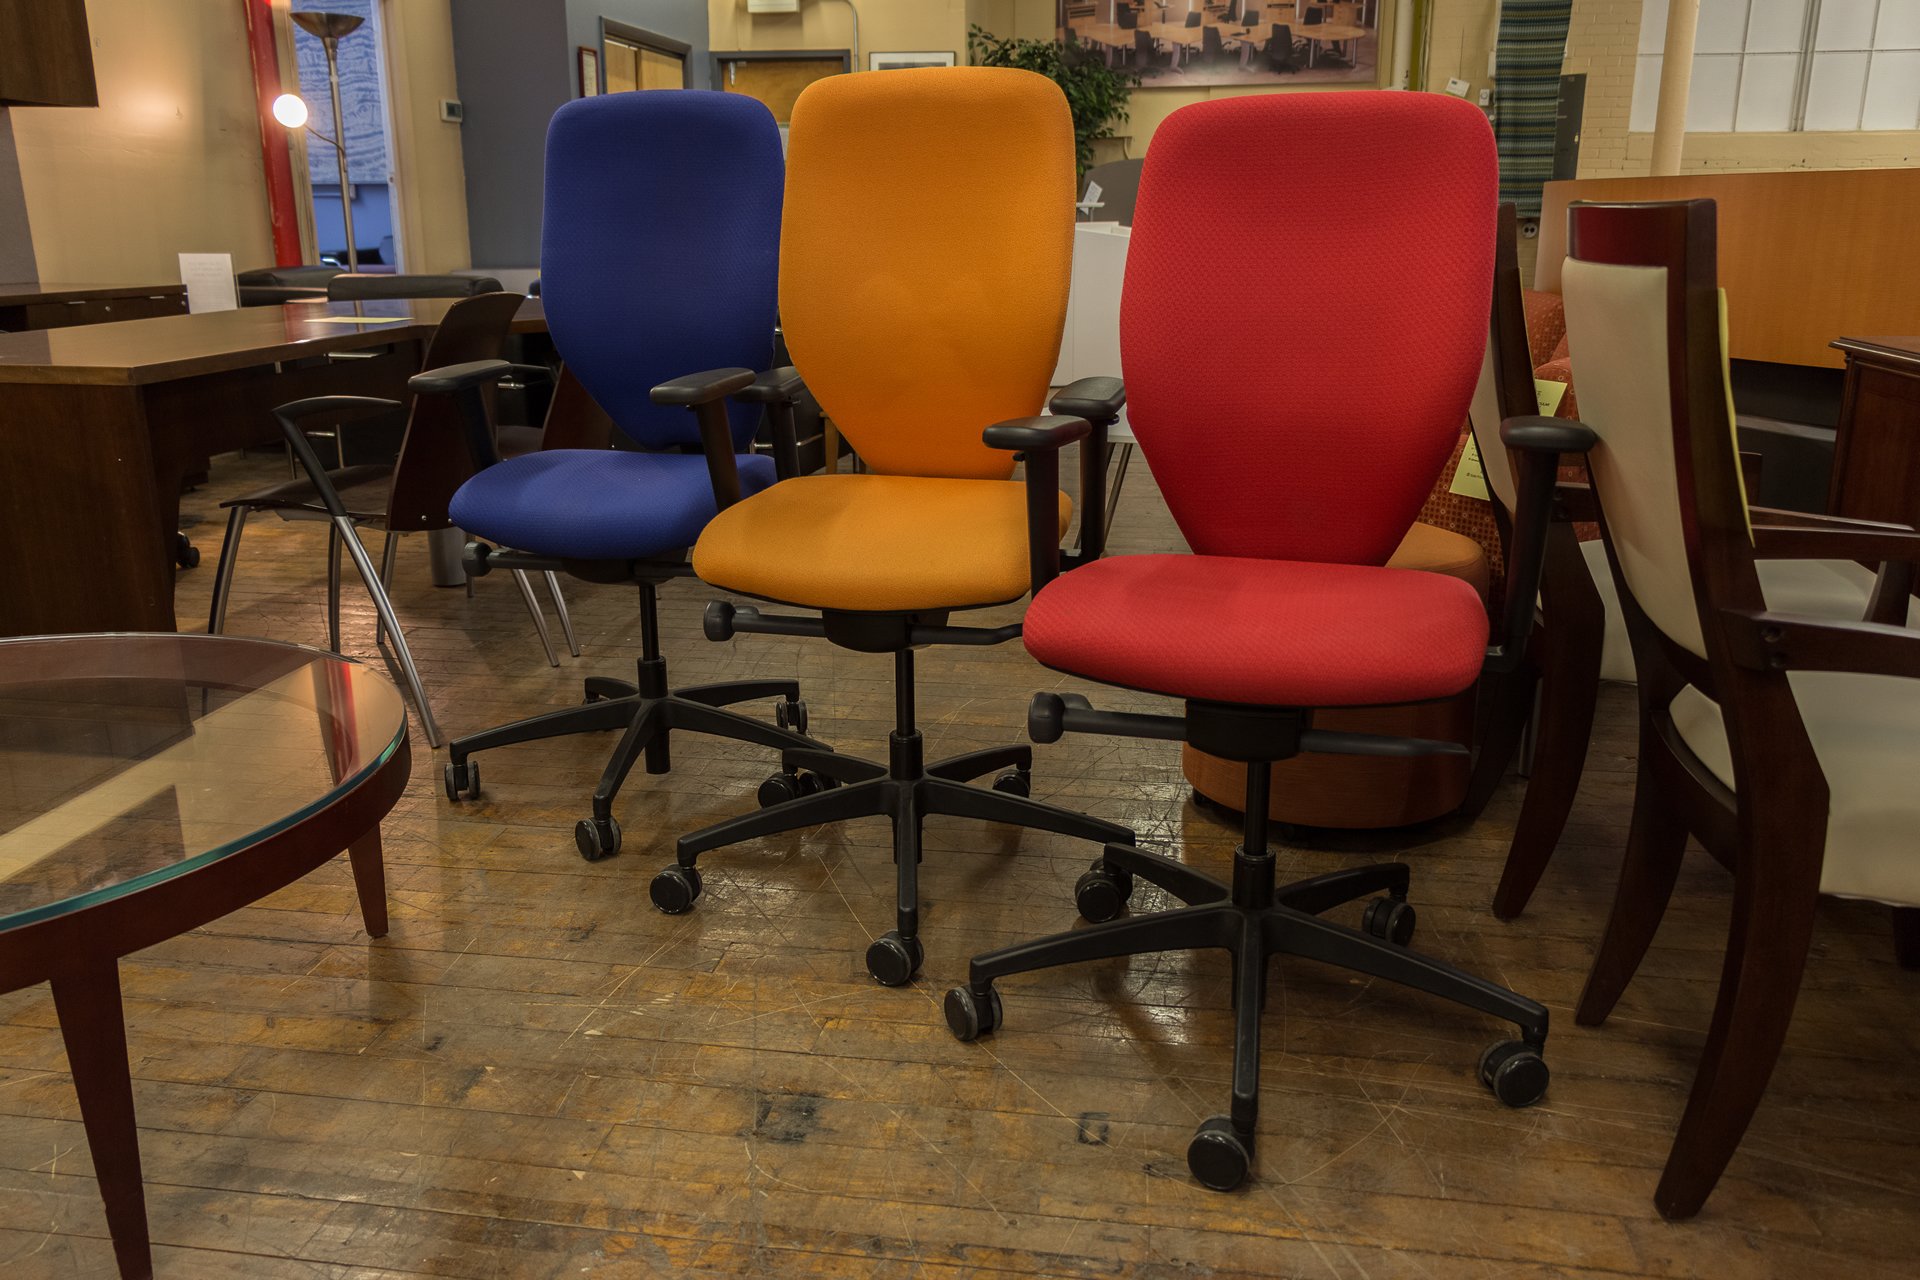 peartreeofficefurniture_peartreeofficefurniture_peartreeofficefurniture_boss-design-multi-function-task-chairs-in-red-blue-and-orange-12.jpg